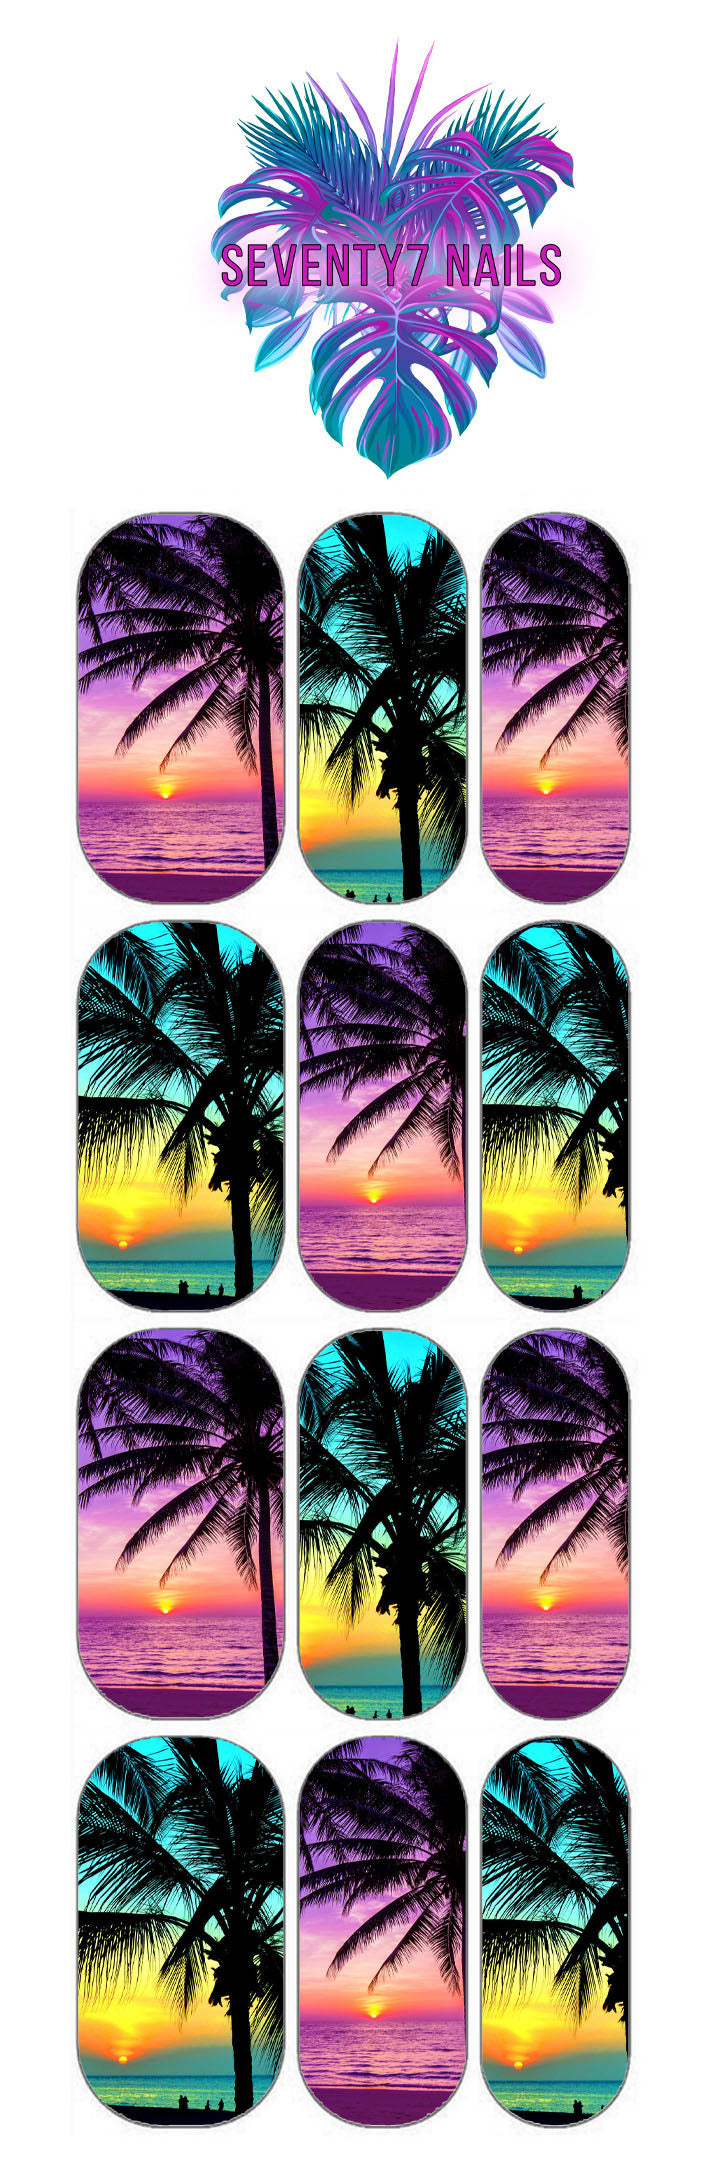 Waterslide Nail Decals - Palm Trees